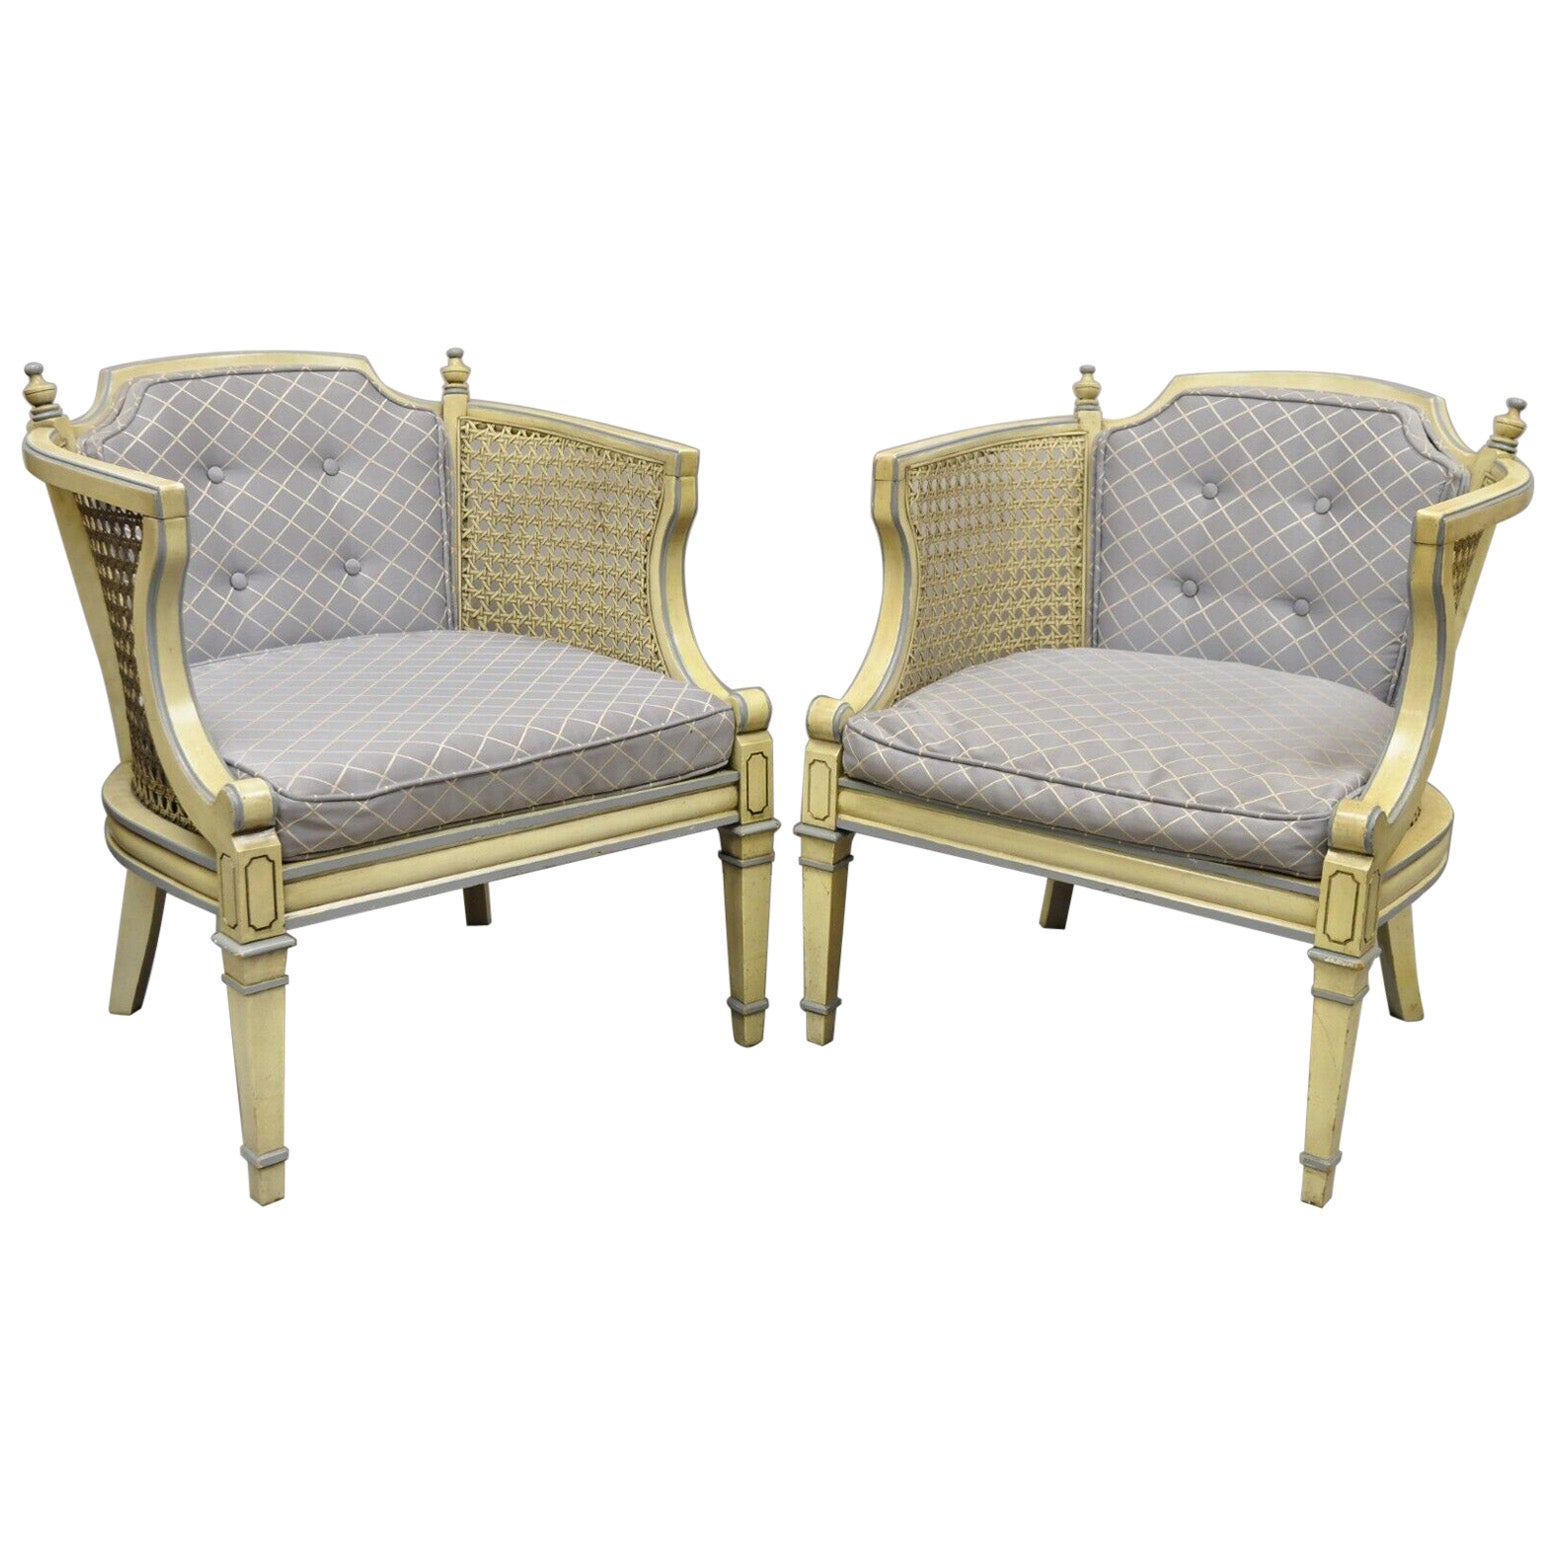 Vintage Hollywood Regency Cream Painted Cane Side Club Lounge Chairs - a Pair